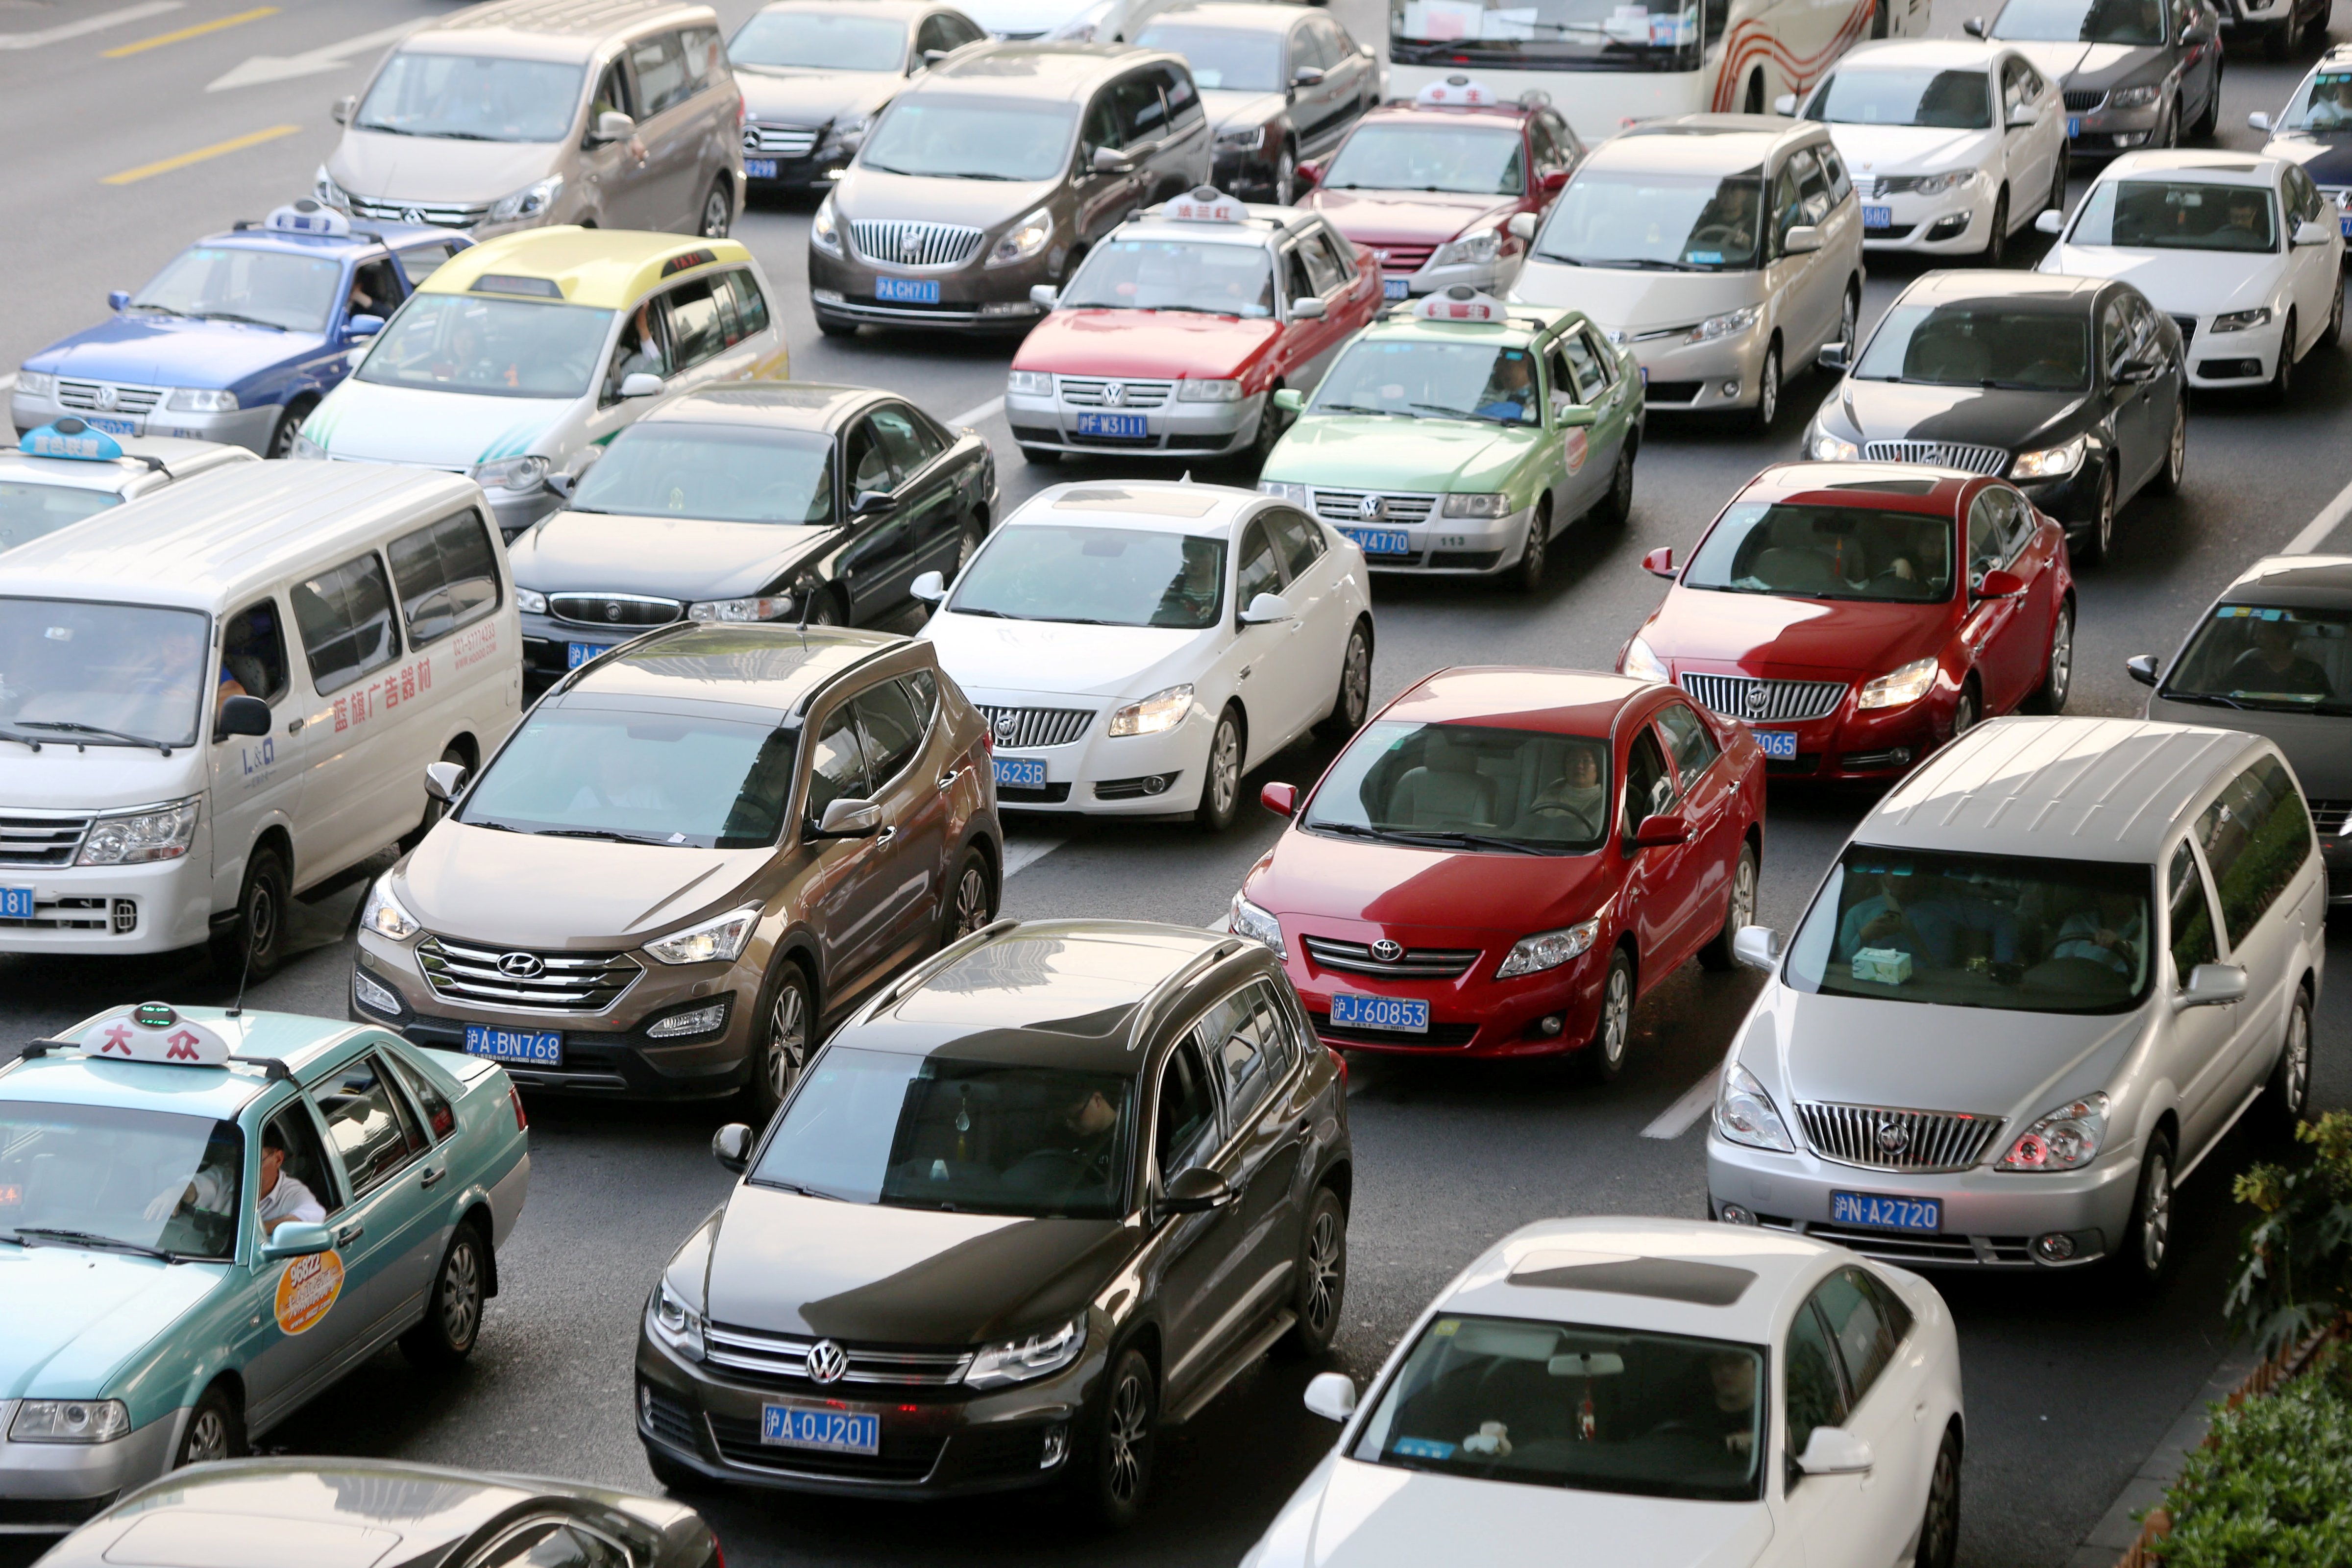 Masses of cars travel on a road in Shanghai, China, April 2, 2015. Concern for personal safety amid rising road rage is among the reasons China's SUV registrations surged 48 percent in the first quarter of this year, according to a research note Sanford C. Bernstein released May 27, 2015. (Weng lei—AP)